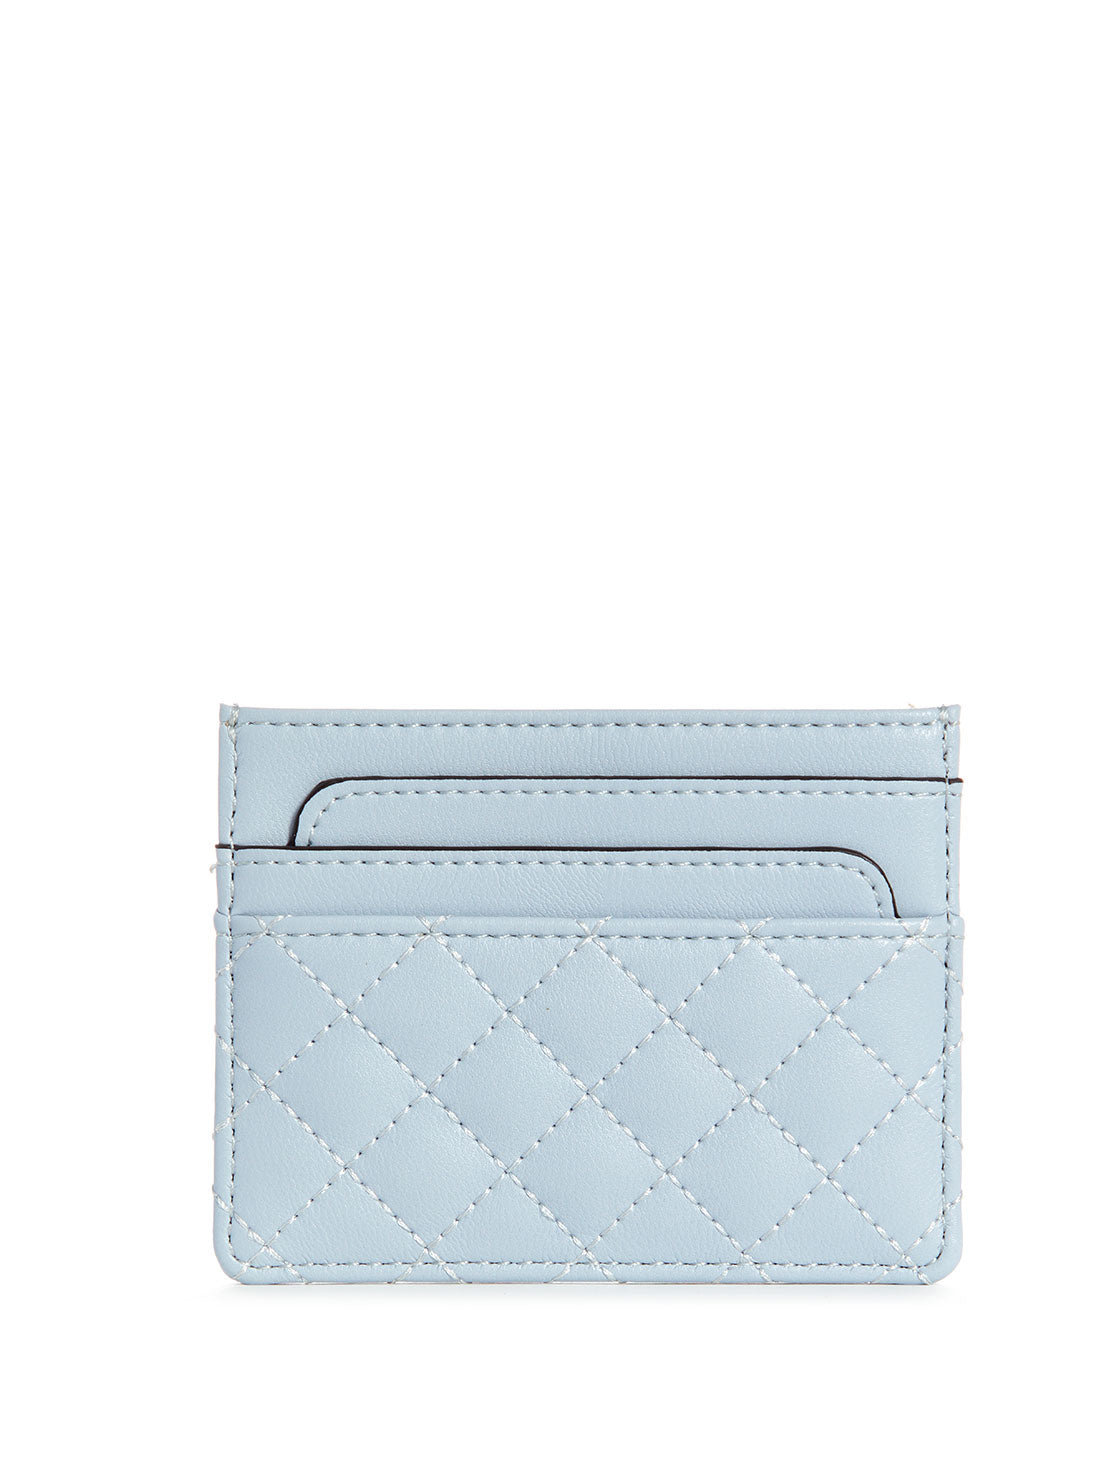 GUESS Sky Blue Rianee Card Holder back view